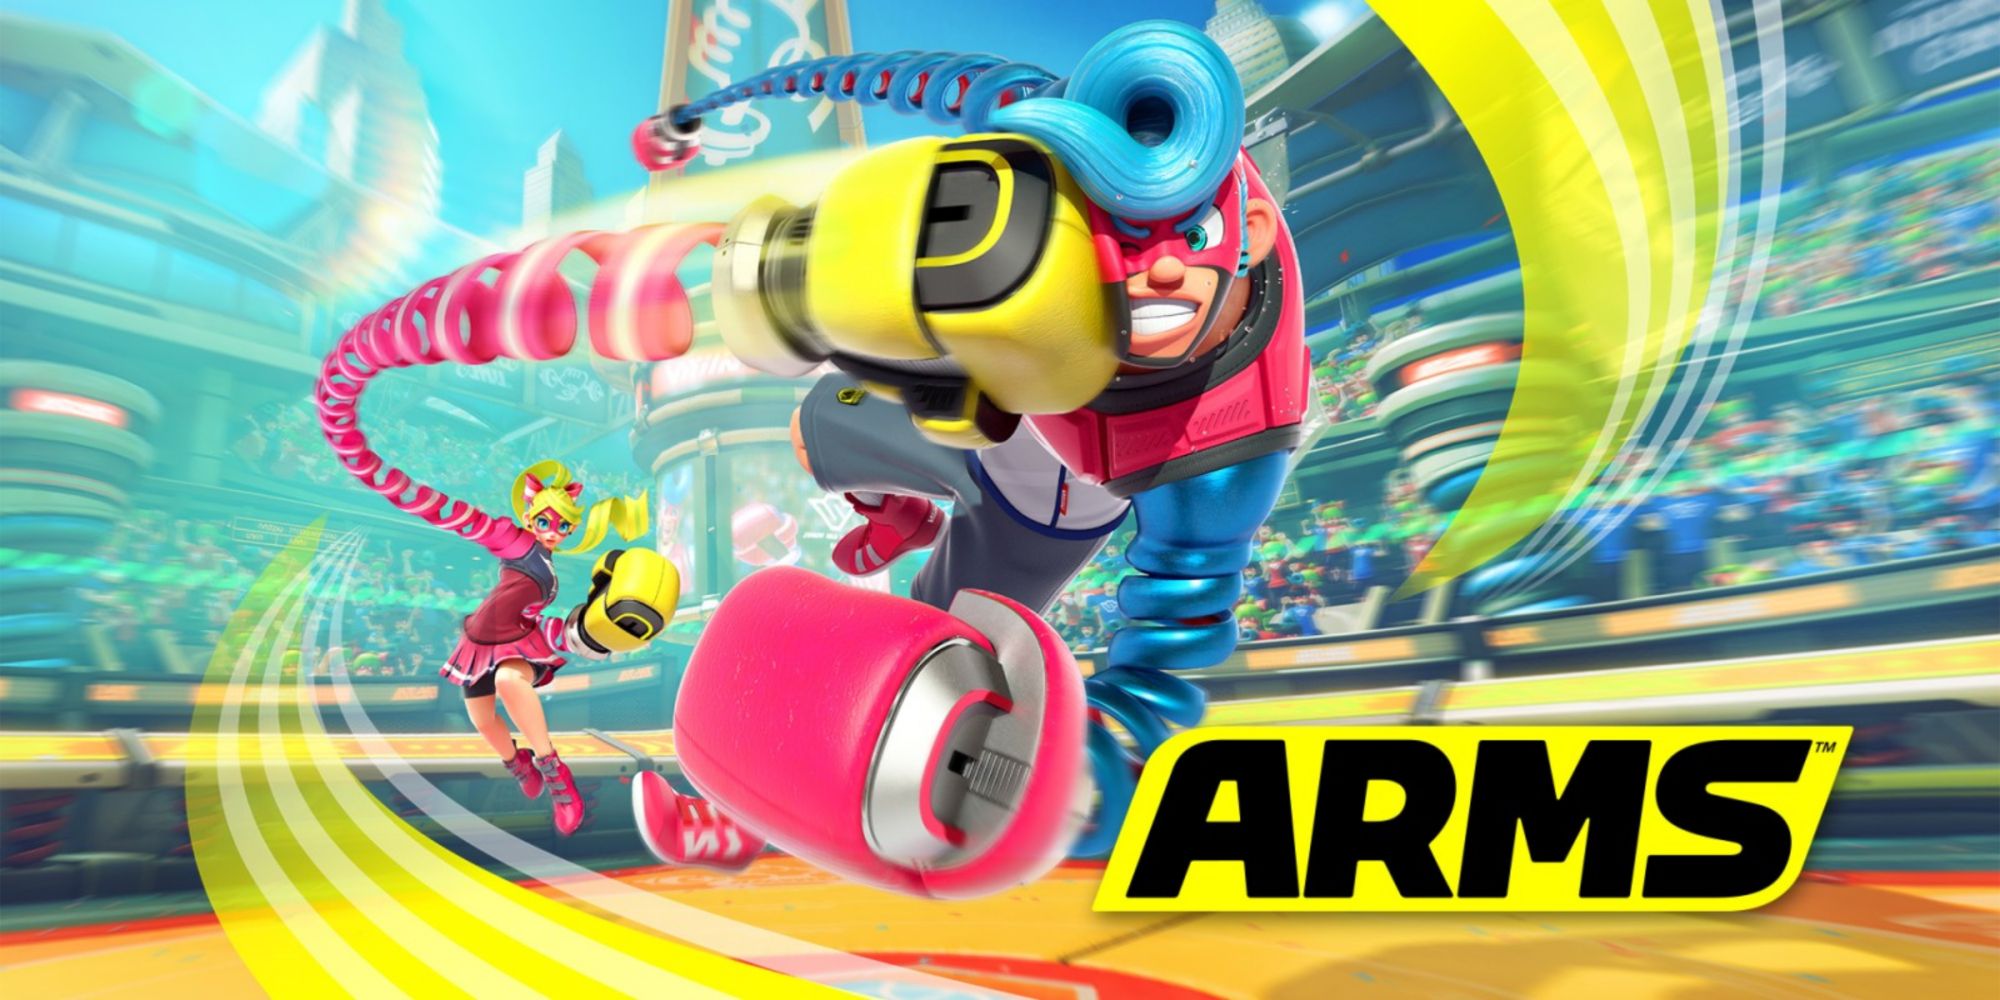 Arms for the Nintendo Switch cover art, featuring one character punching another in cartoon style